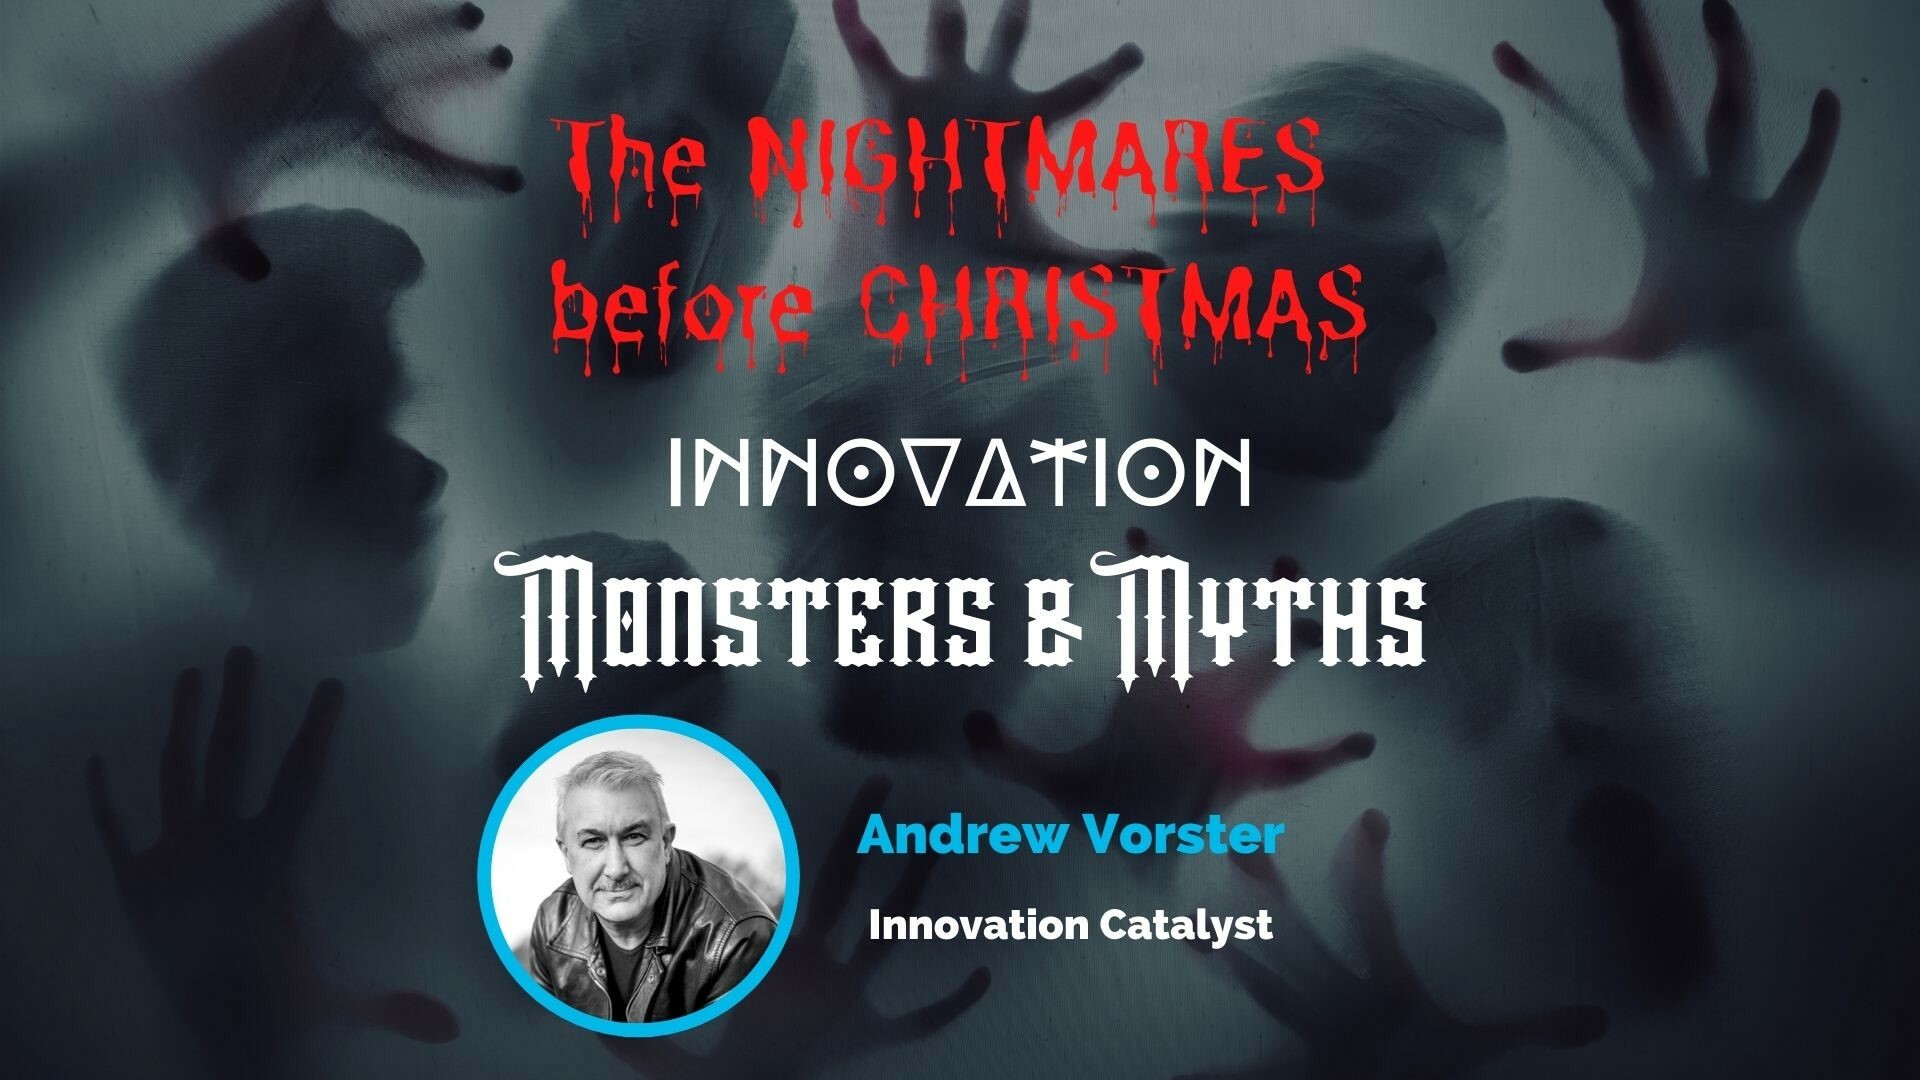 Nightmares before christmas overview 1